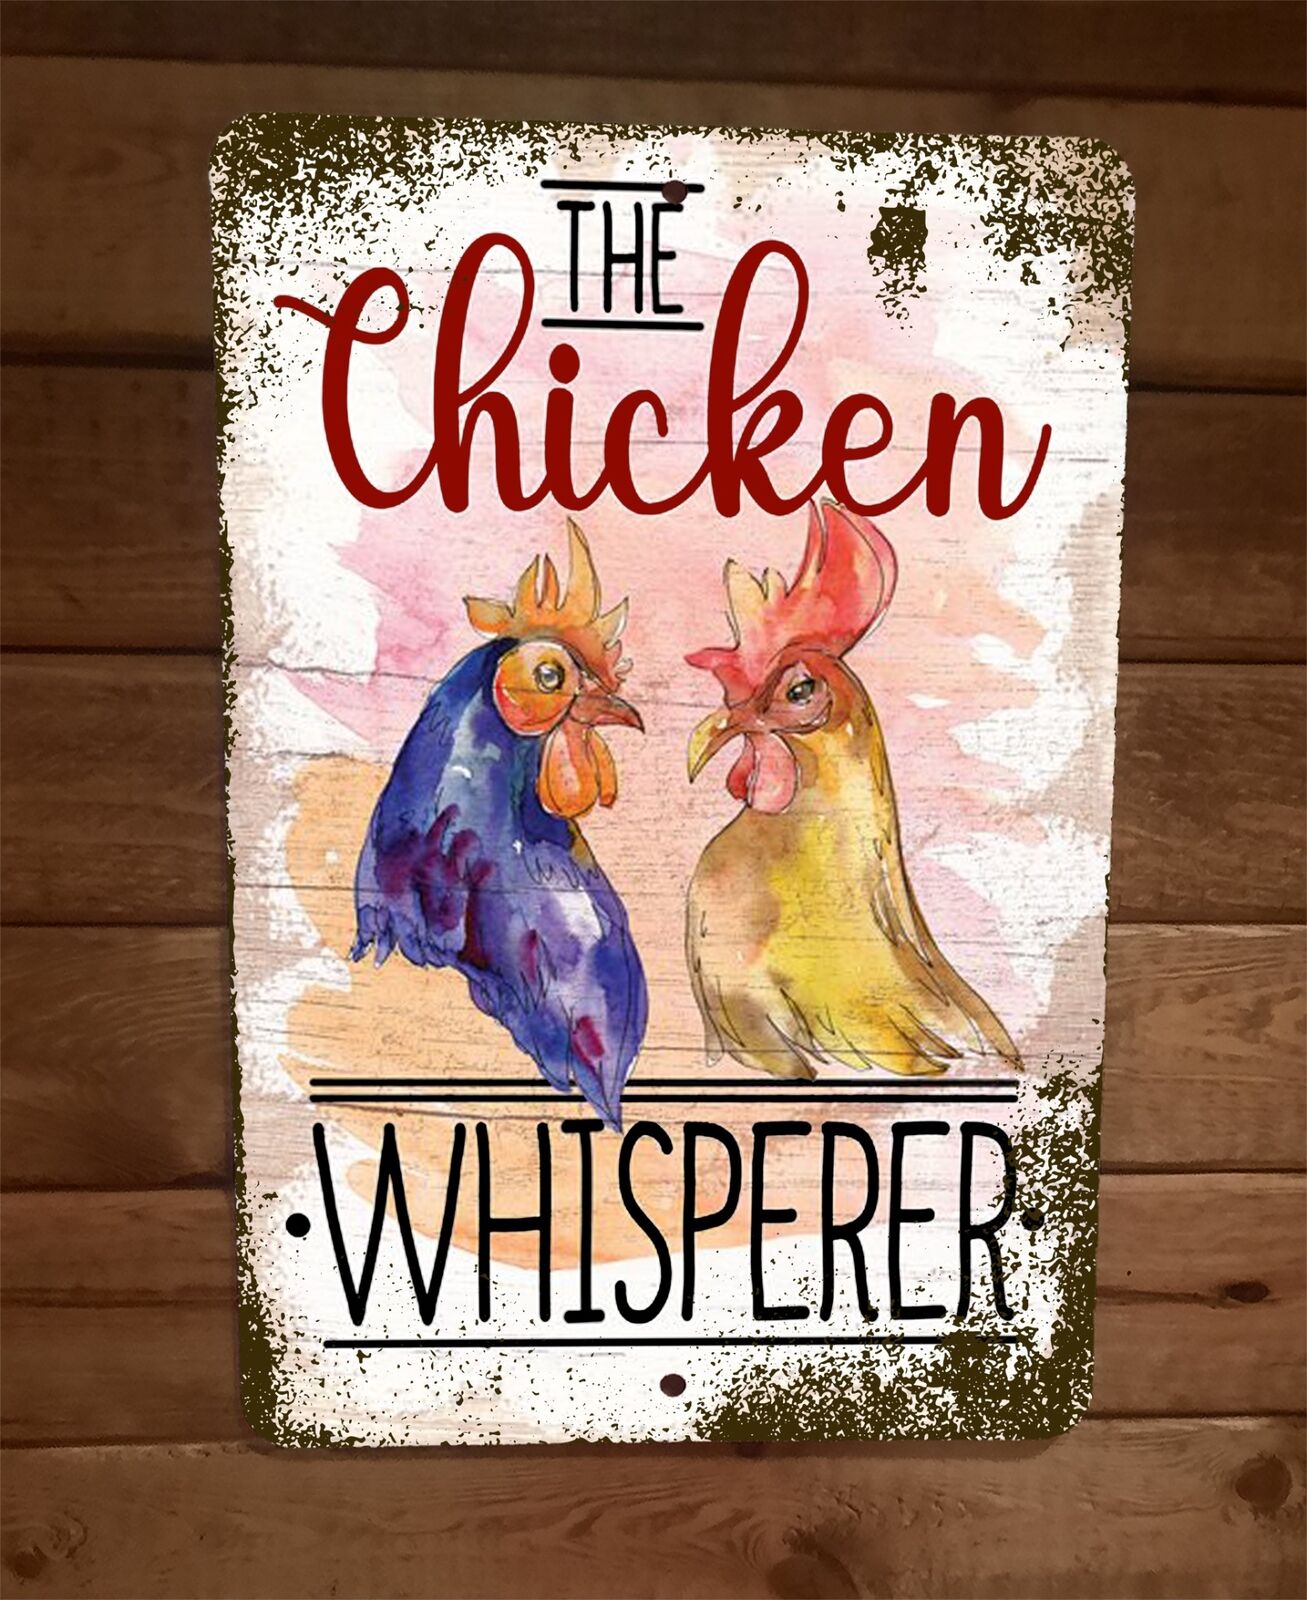 The Chicken Whisperer 8x12 Metal Wall Sign Animal Poster